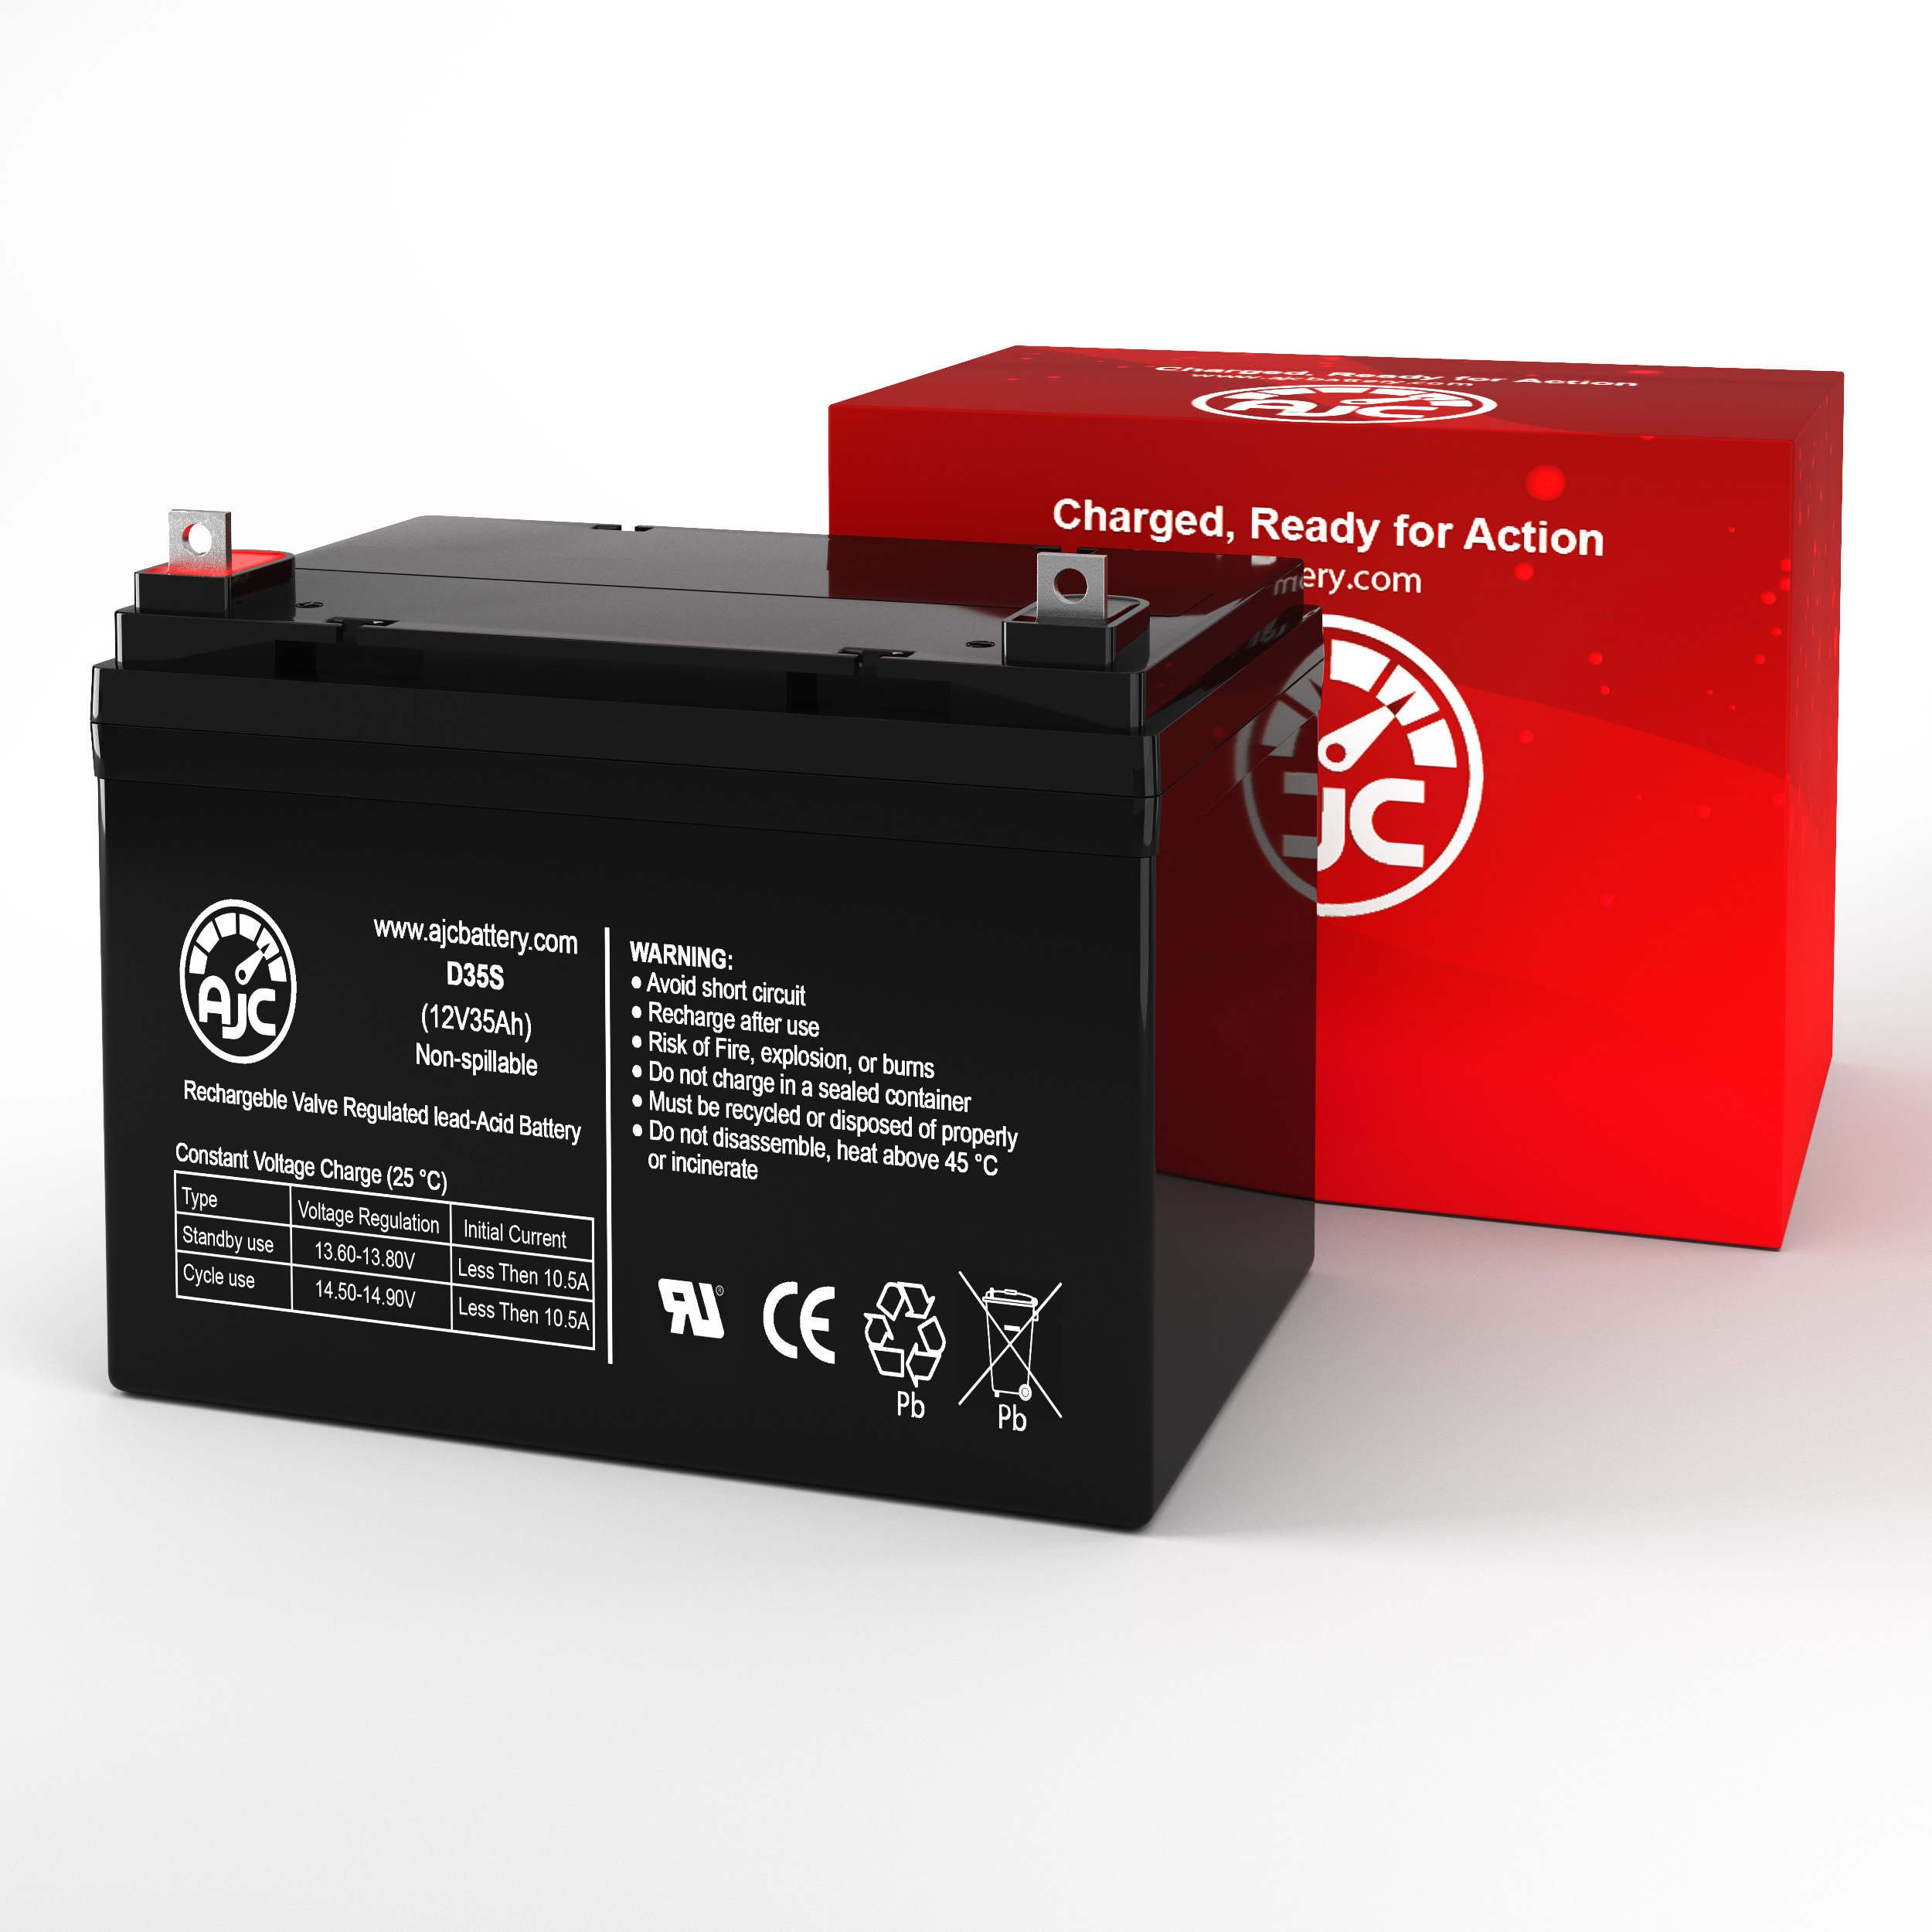 K&K Jump N Carry 12V 35Ah Jump Starter Battery - This Is an AJC Brand Replacement - image 2 of 6